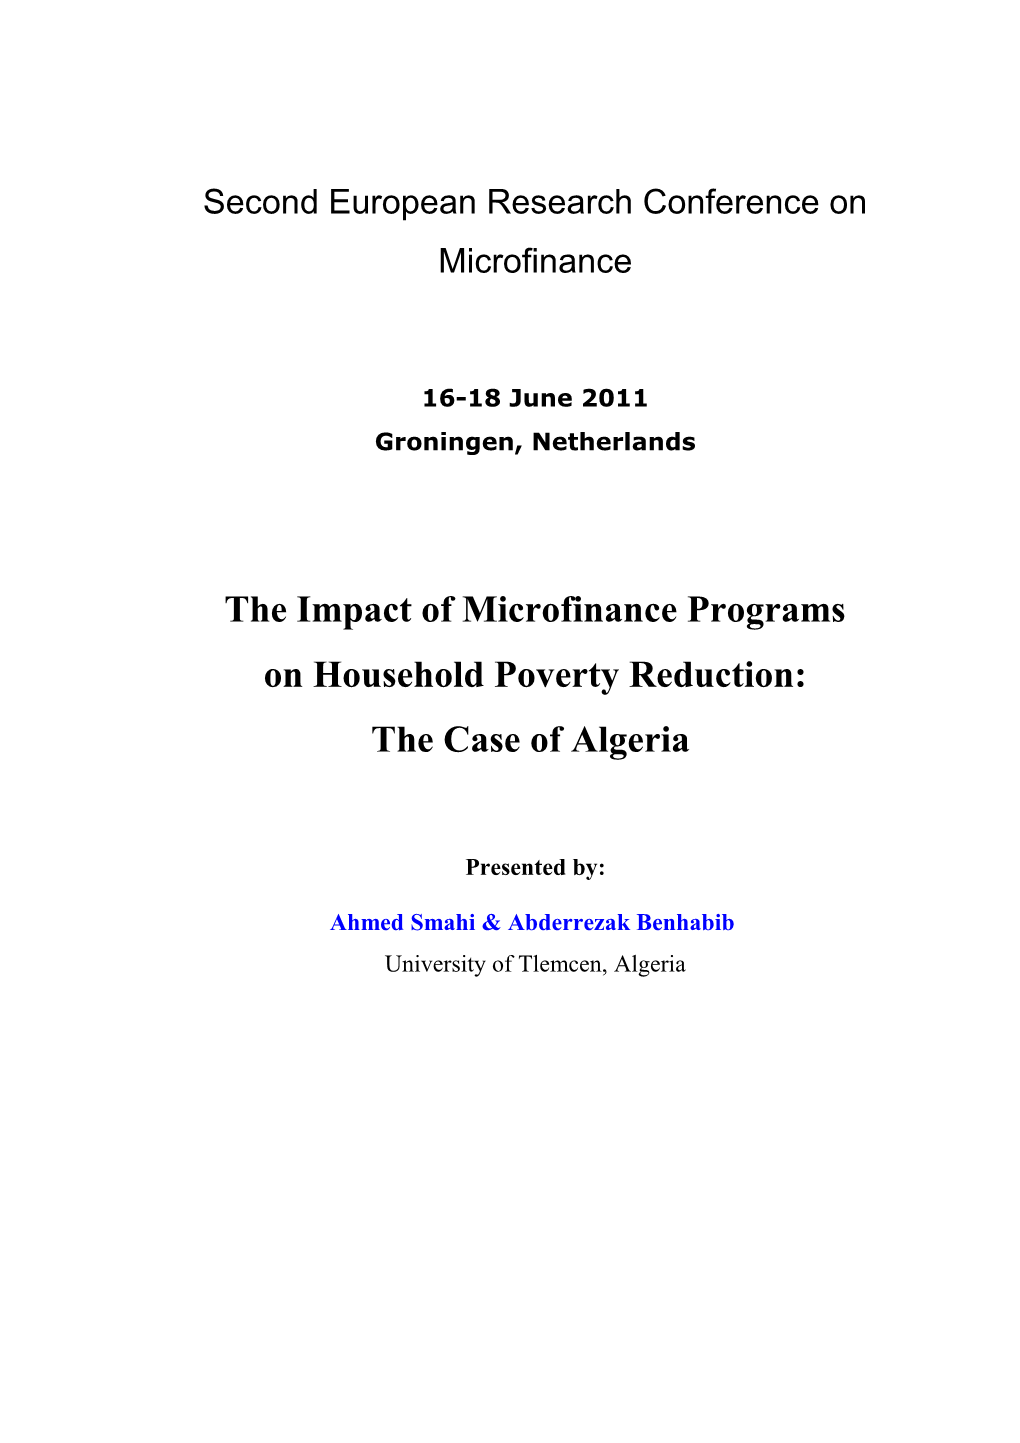 Second European Research Conference on Microfinance